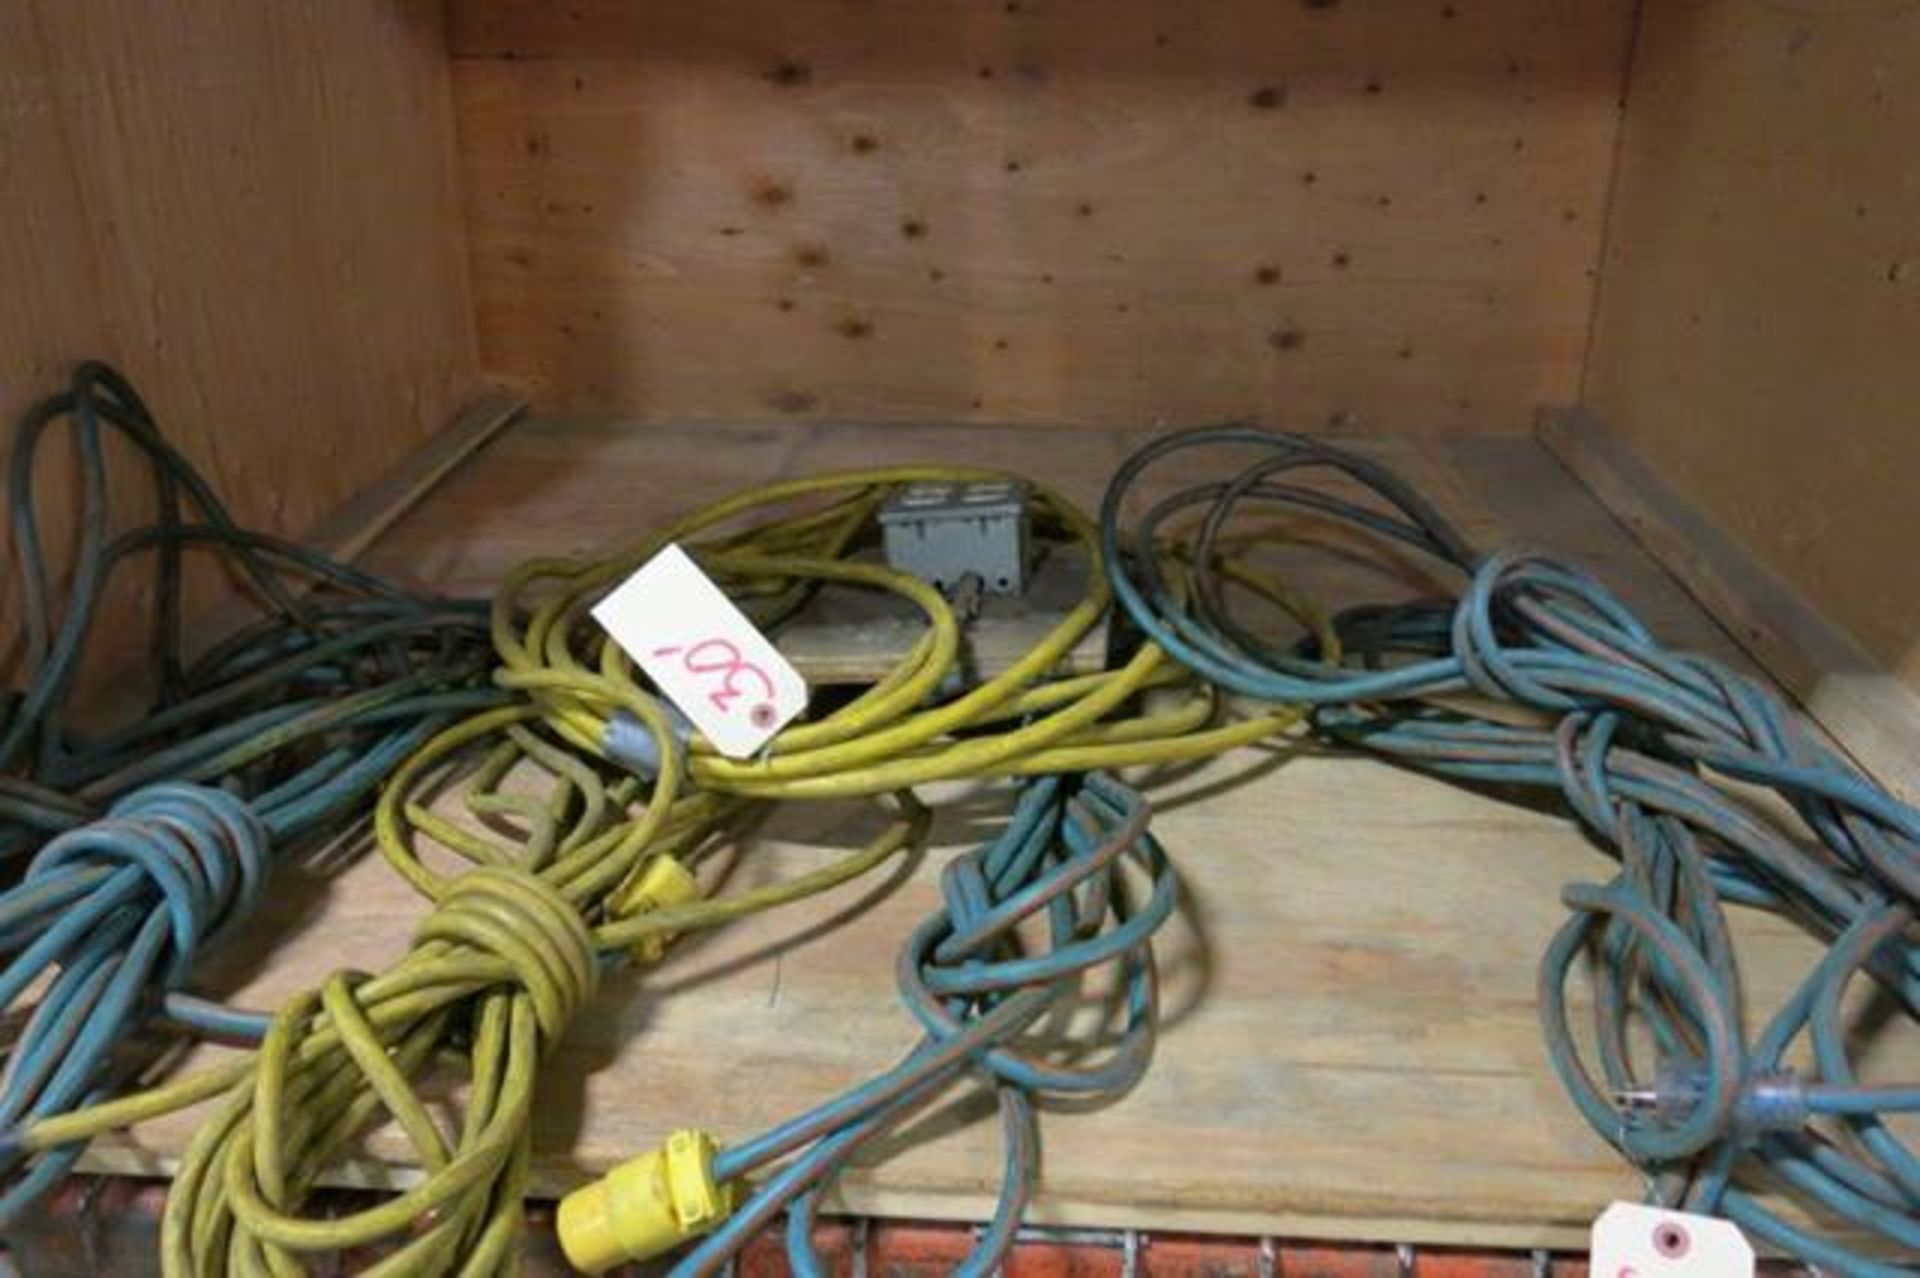 LOT OF 25' AND 30' EXTENSION CORDS - Image 2 of 2